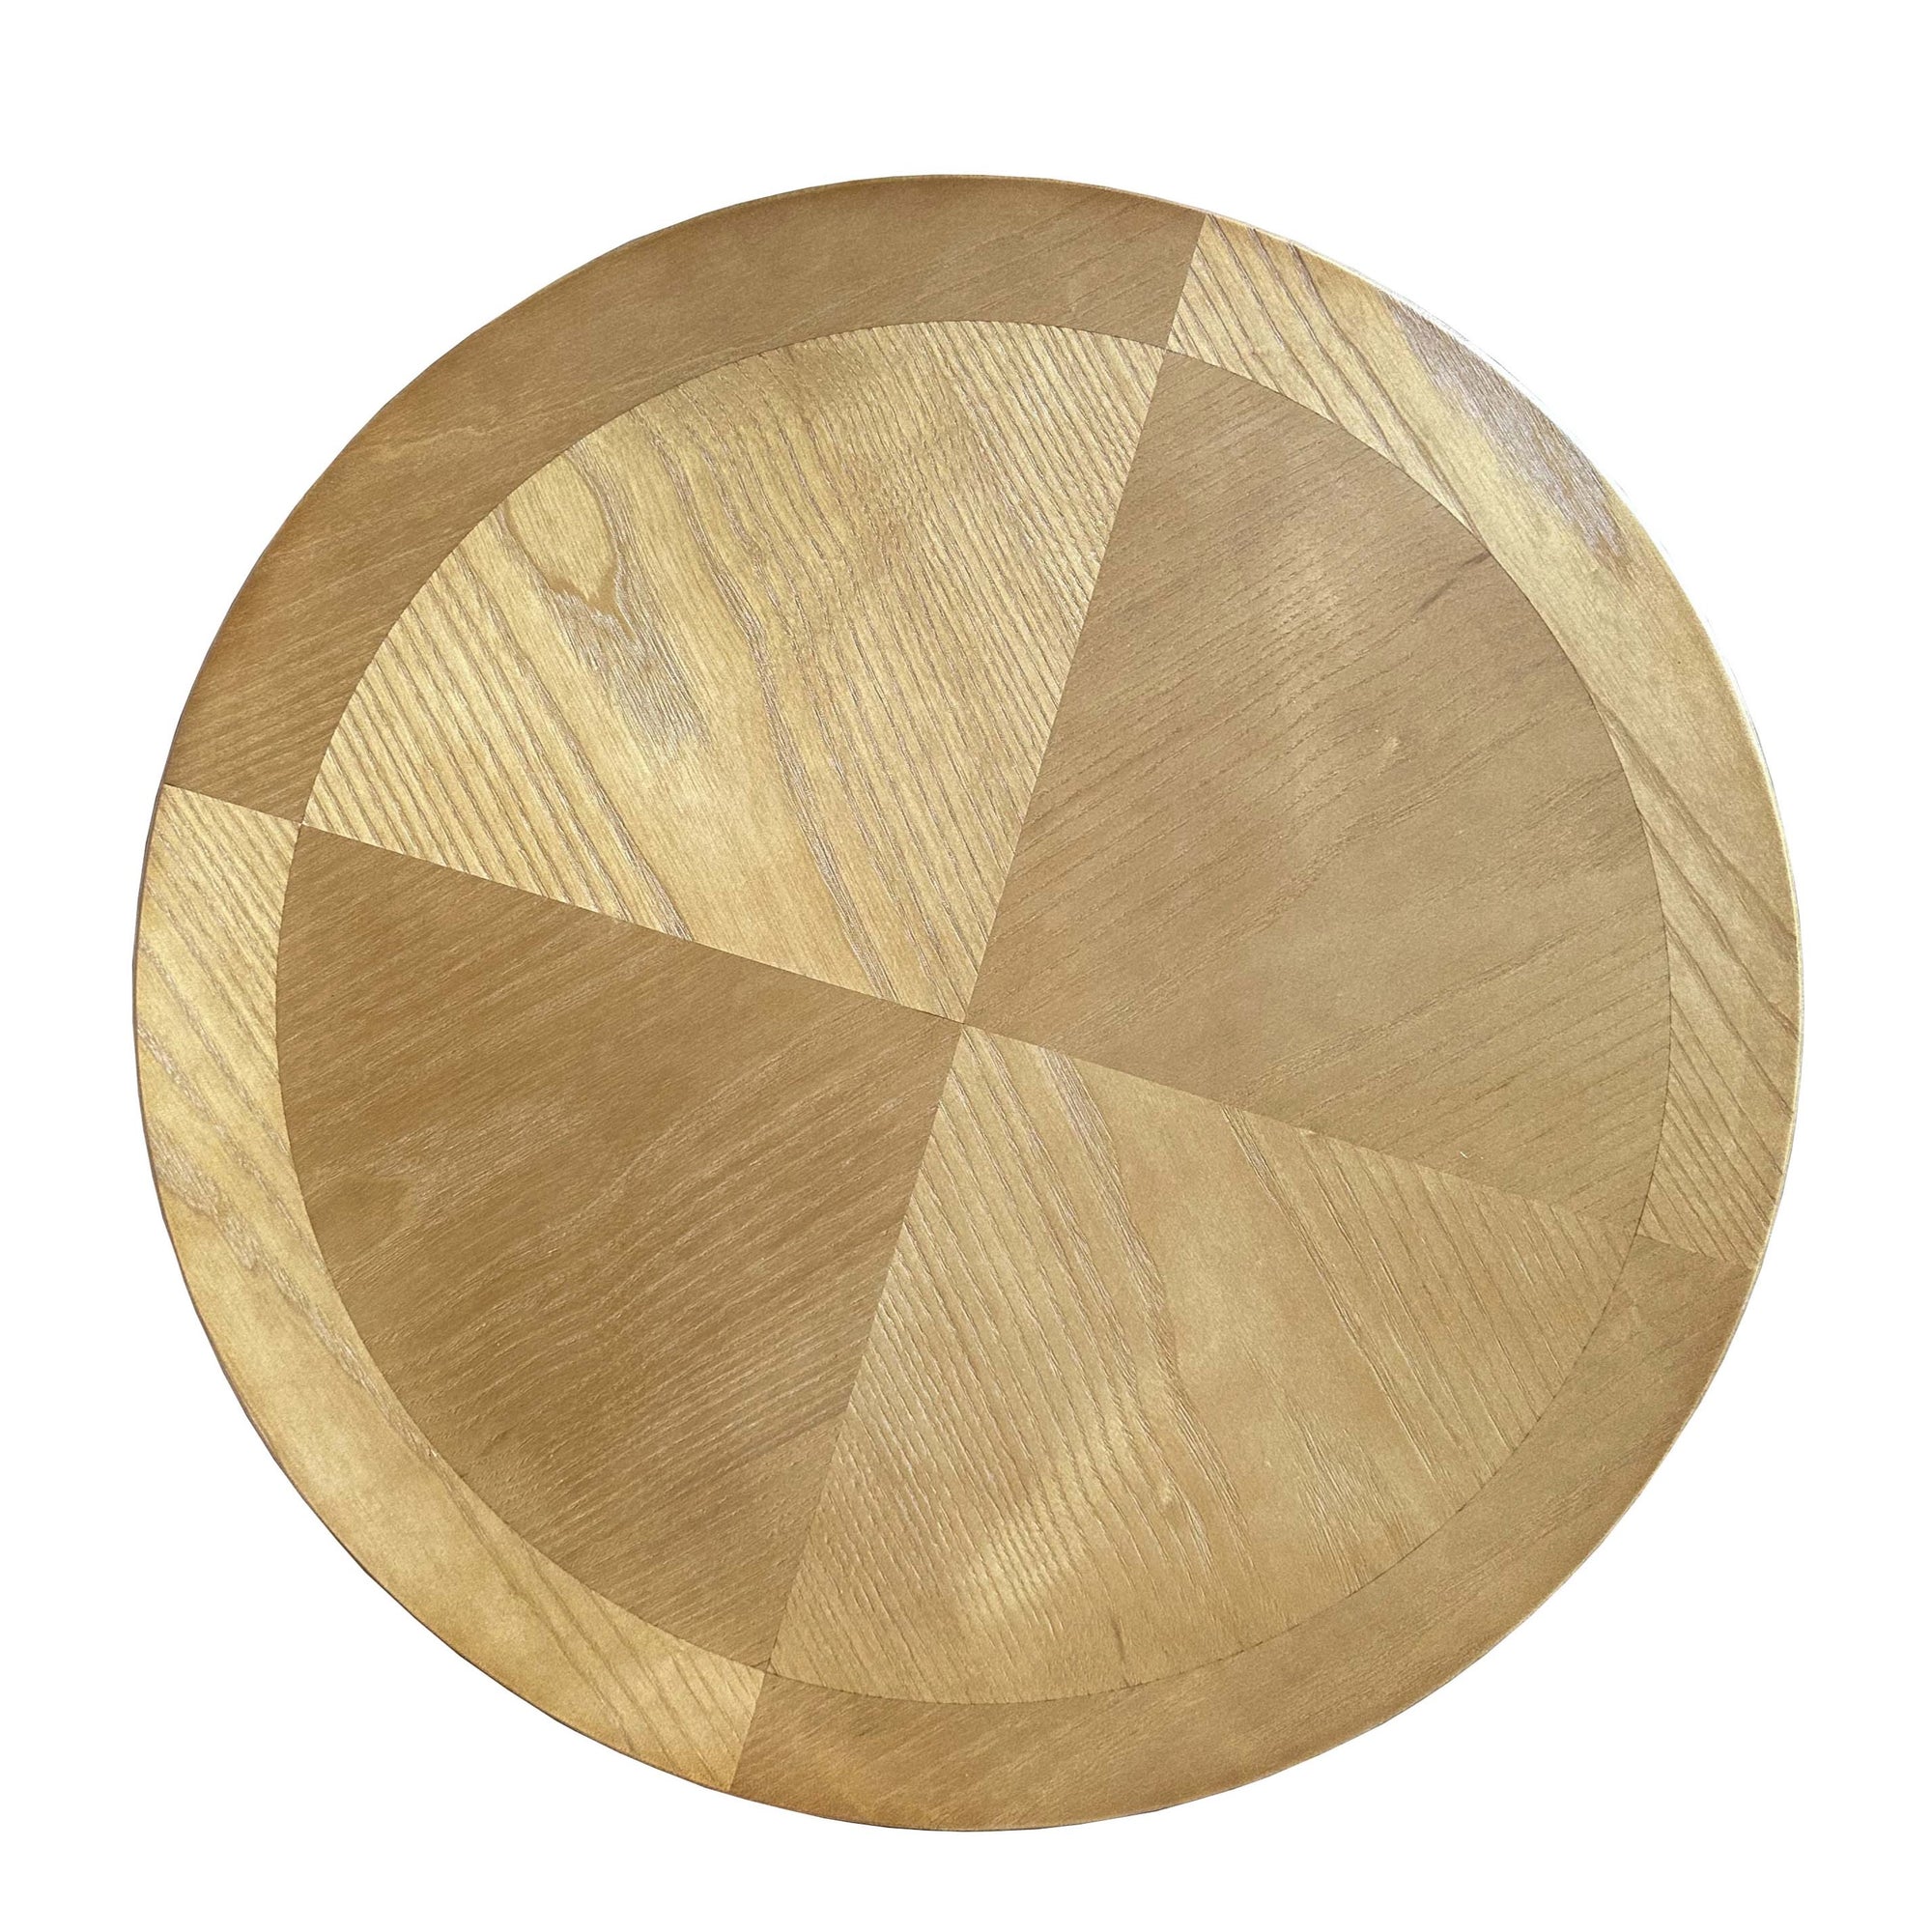 FV-11C ORA Round Wood Table tops| Coffee table tops|Dining Table tops DIA 60cm\80cm